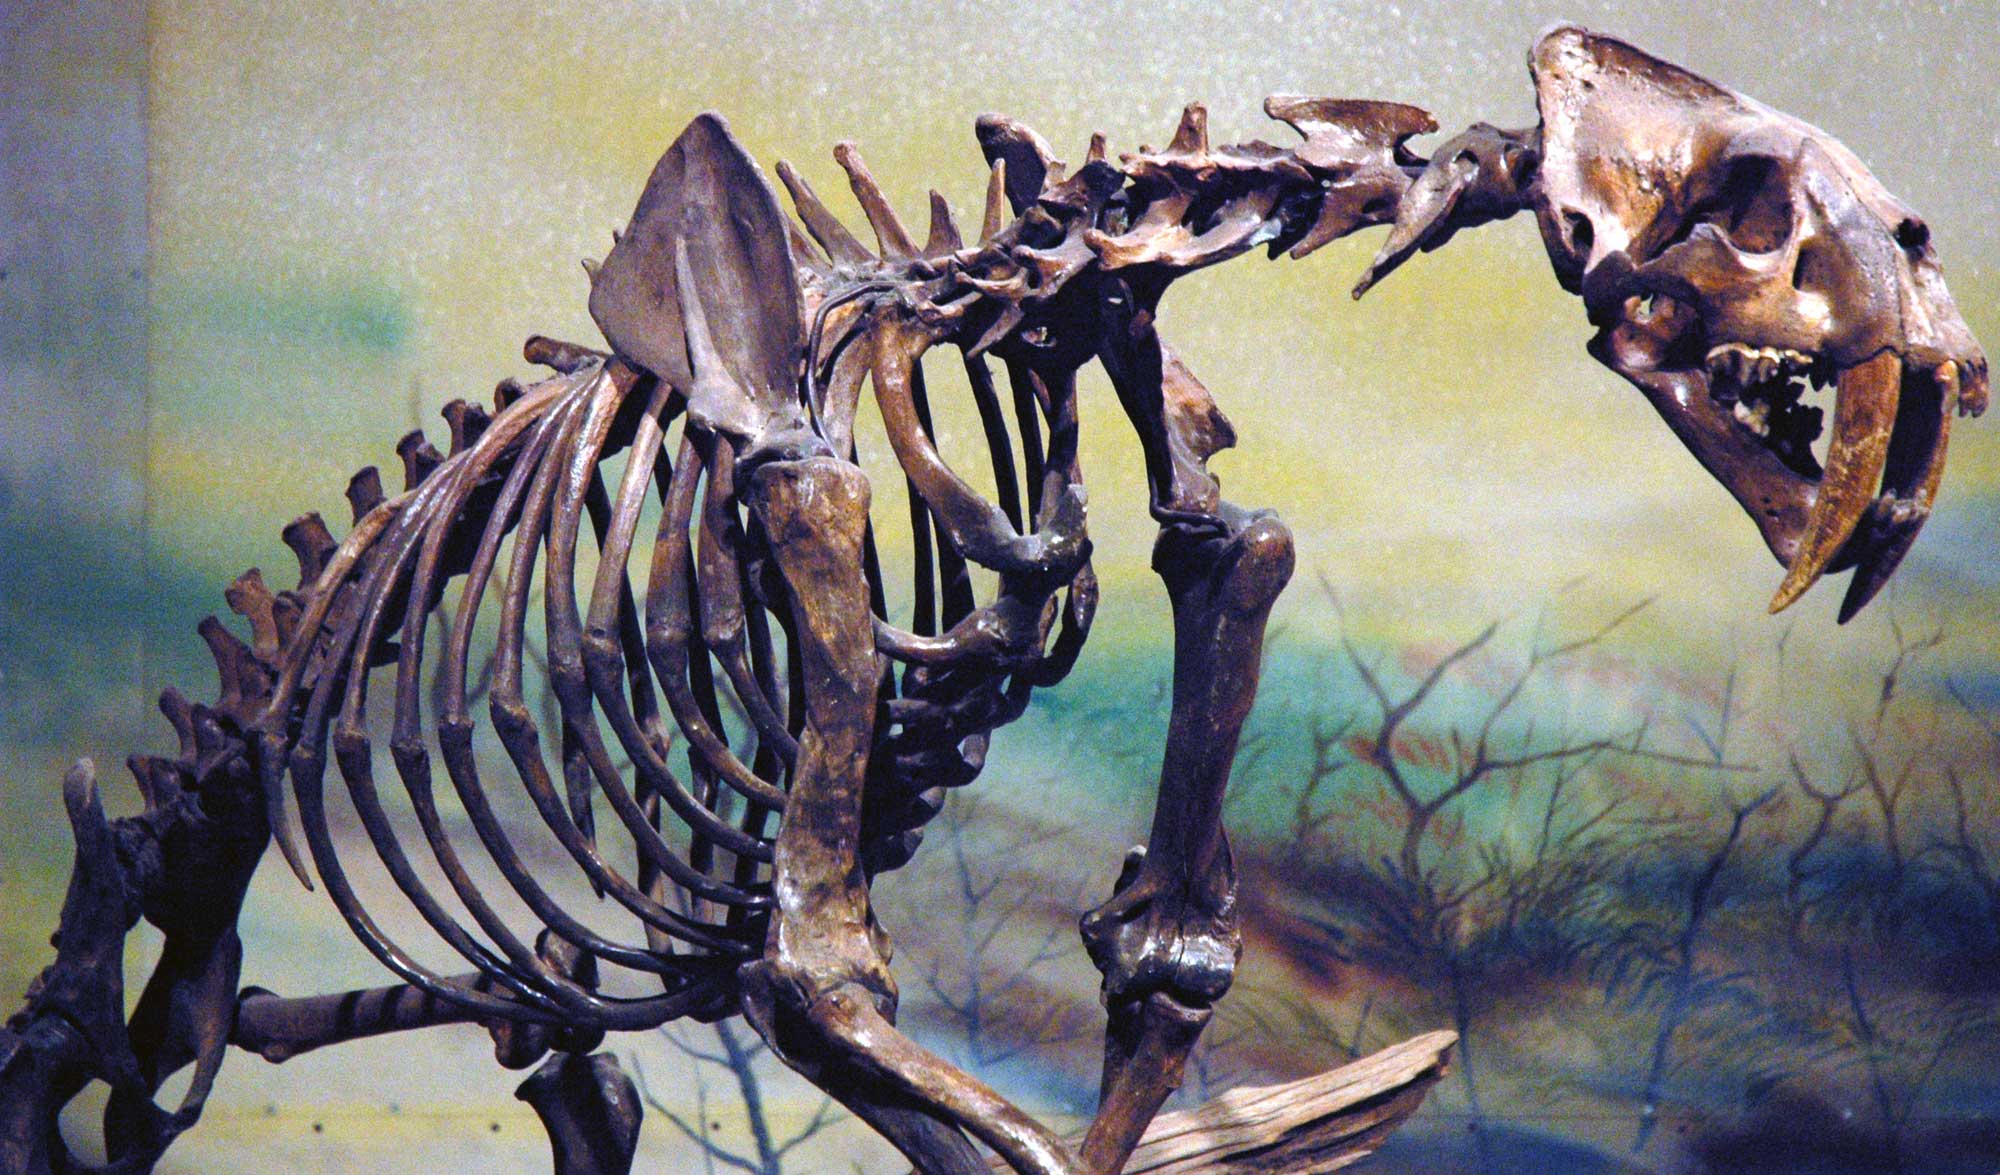 Photograph of a mounted skeleton of a saber-toothed cat on display in a museum. The skull of the cat has two very long, slightly curved canine teeth in its upper jaw.